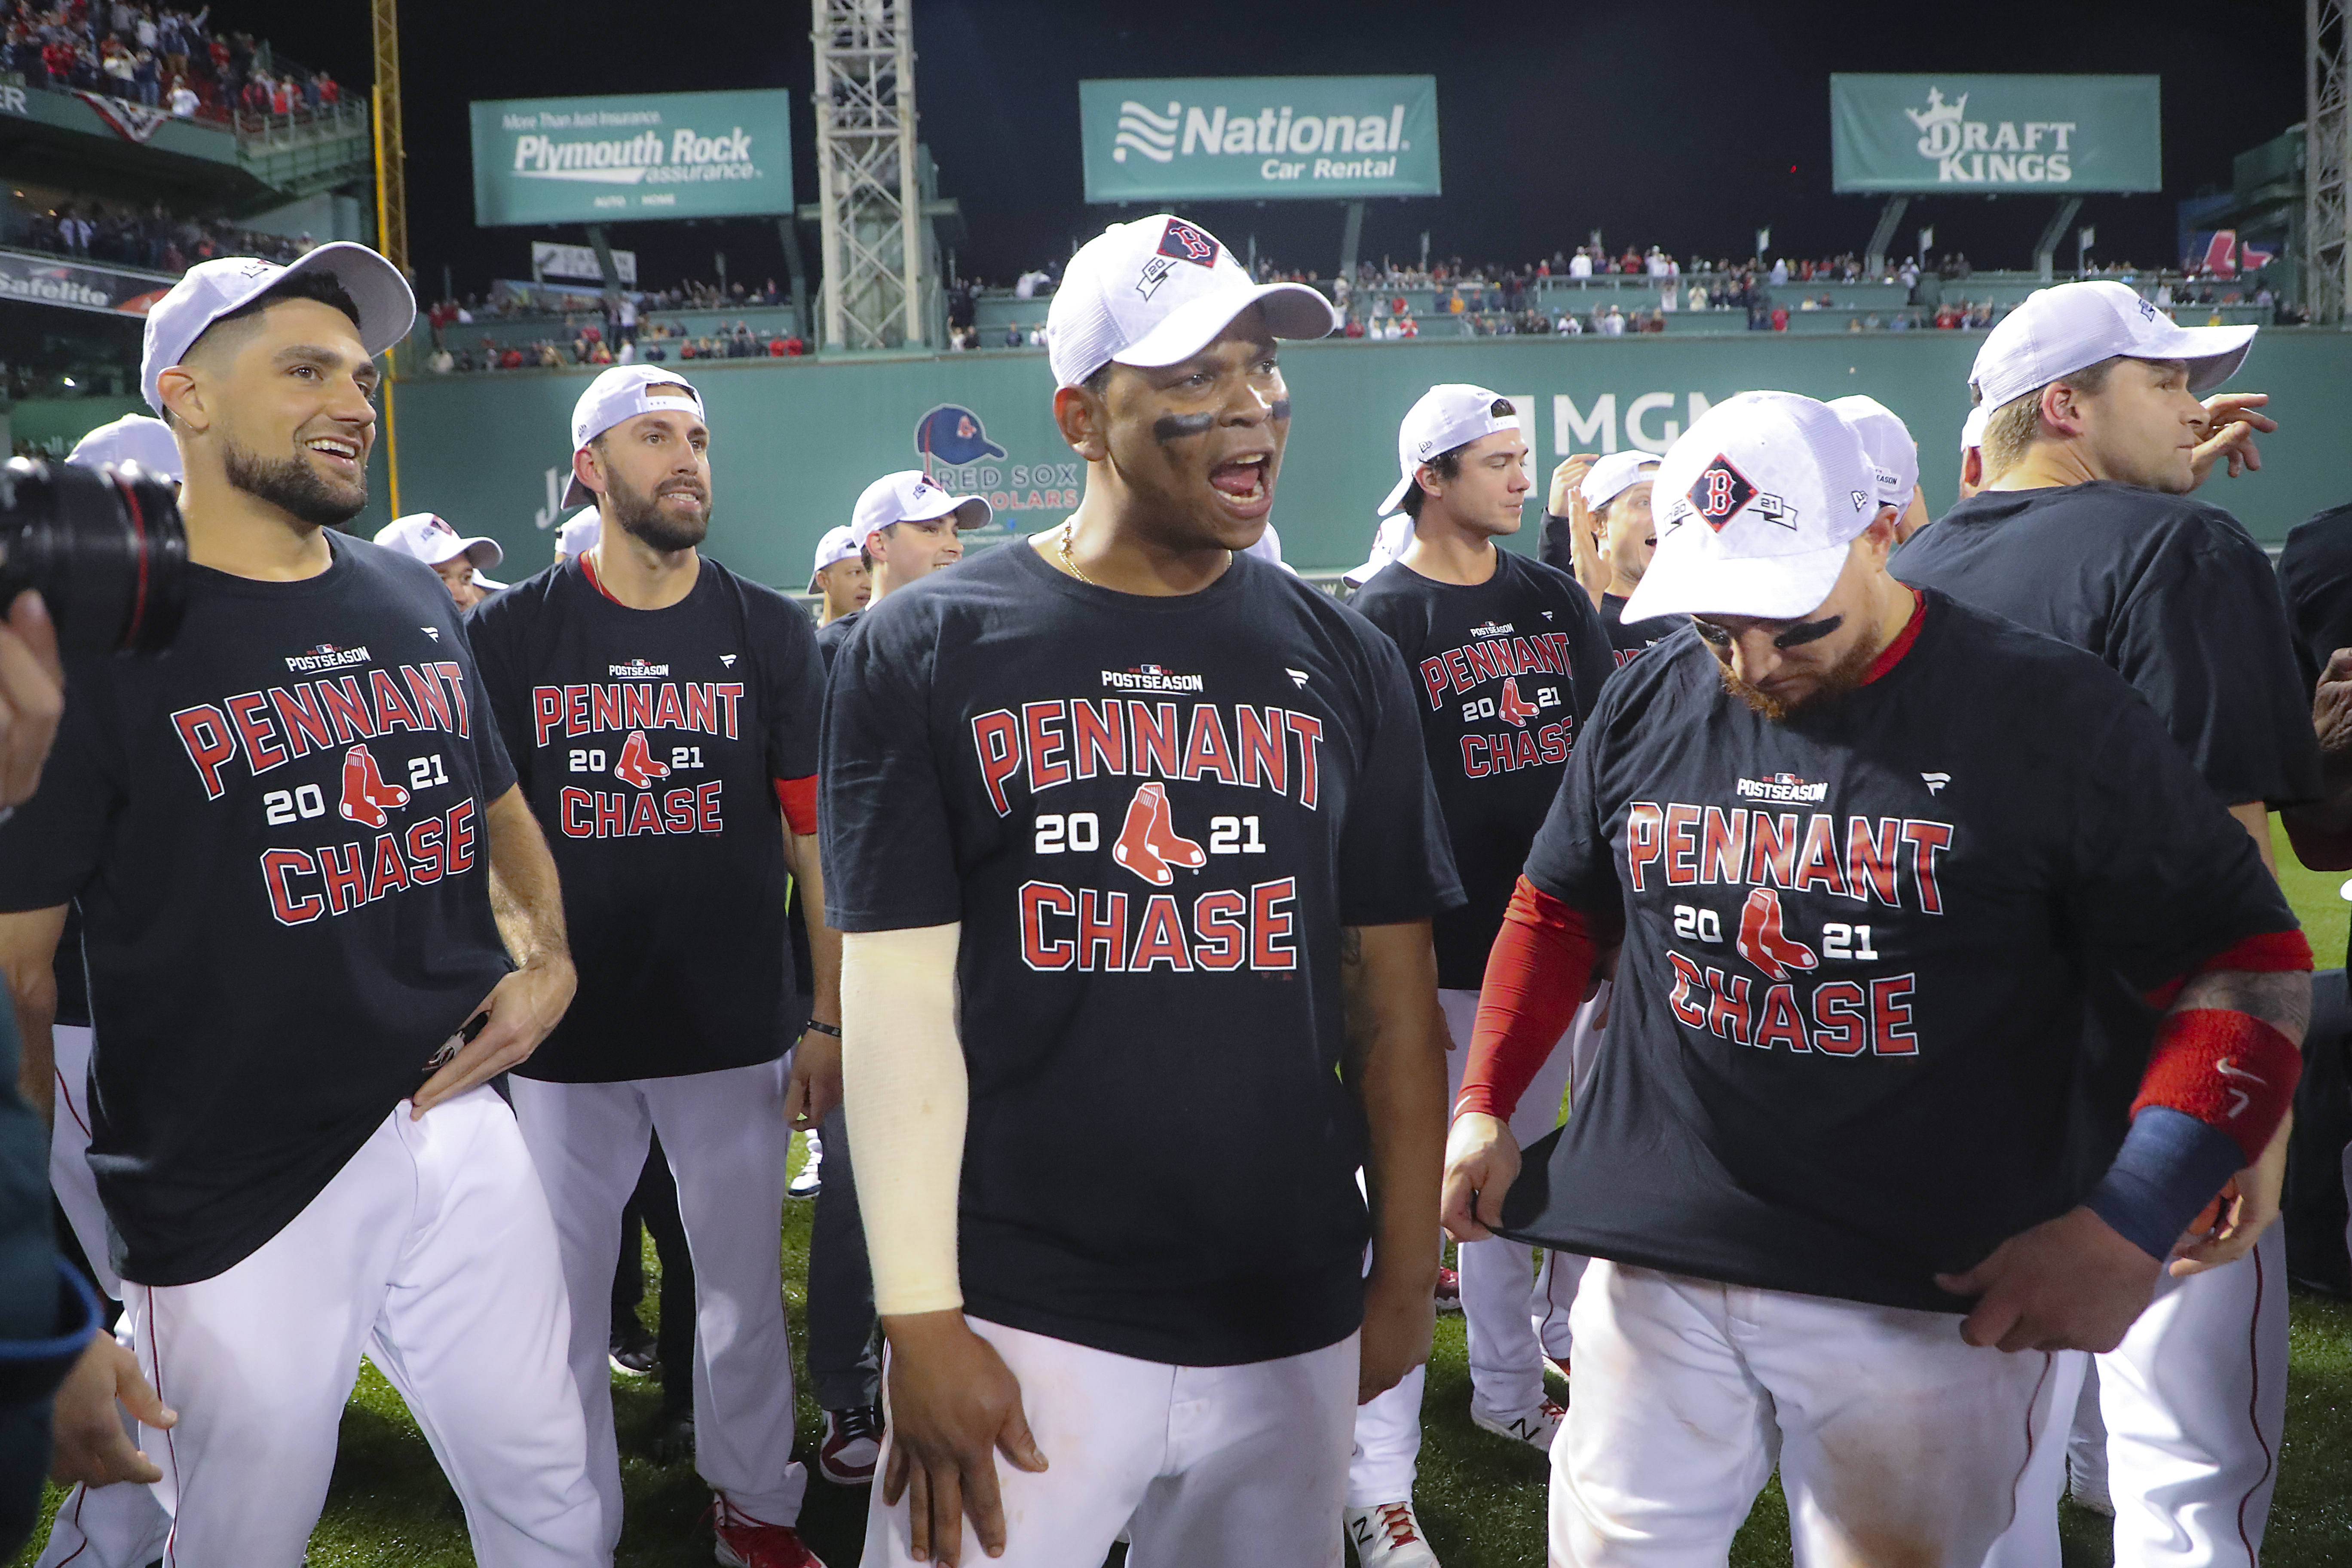 MLB playoffs: Red Sox-Astros ALCS schedule